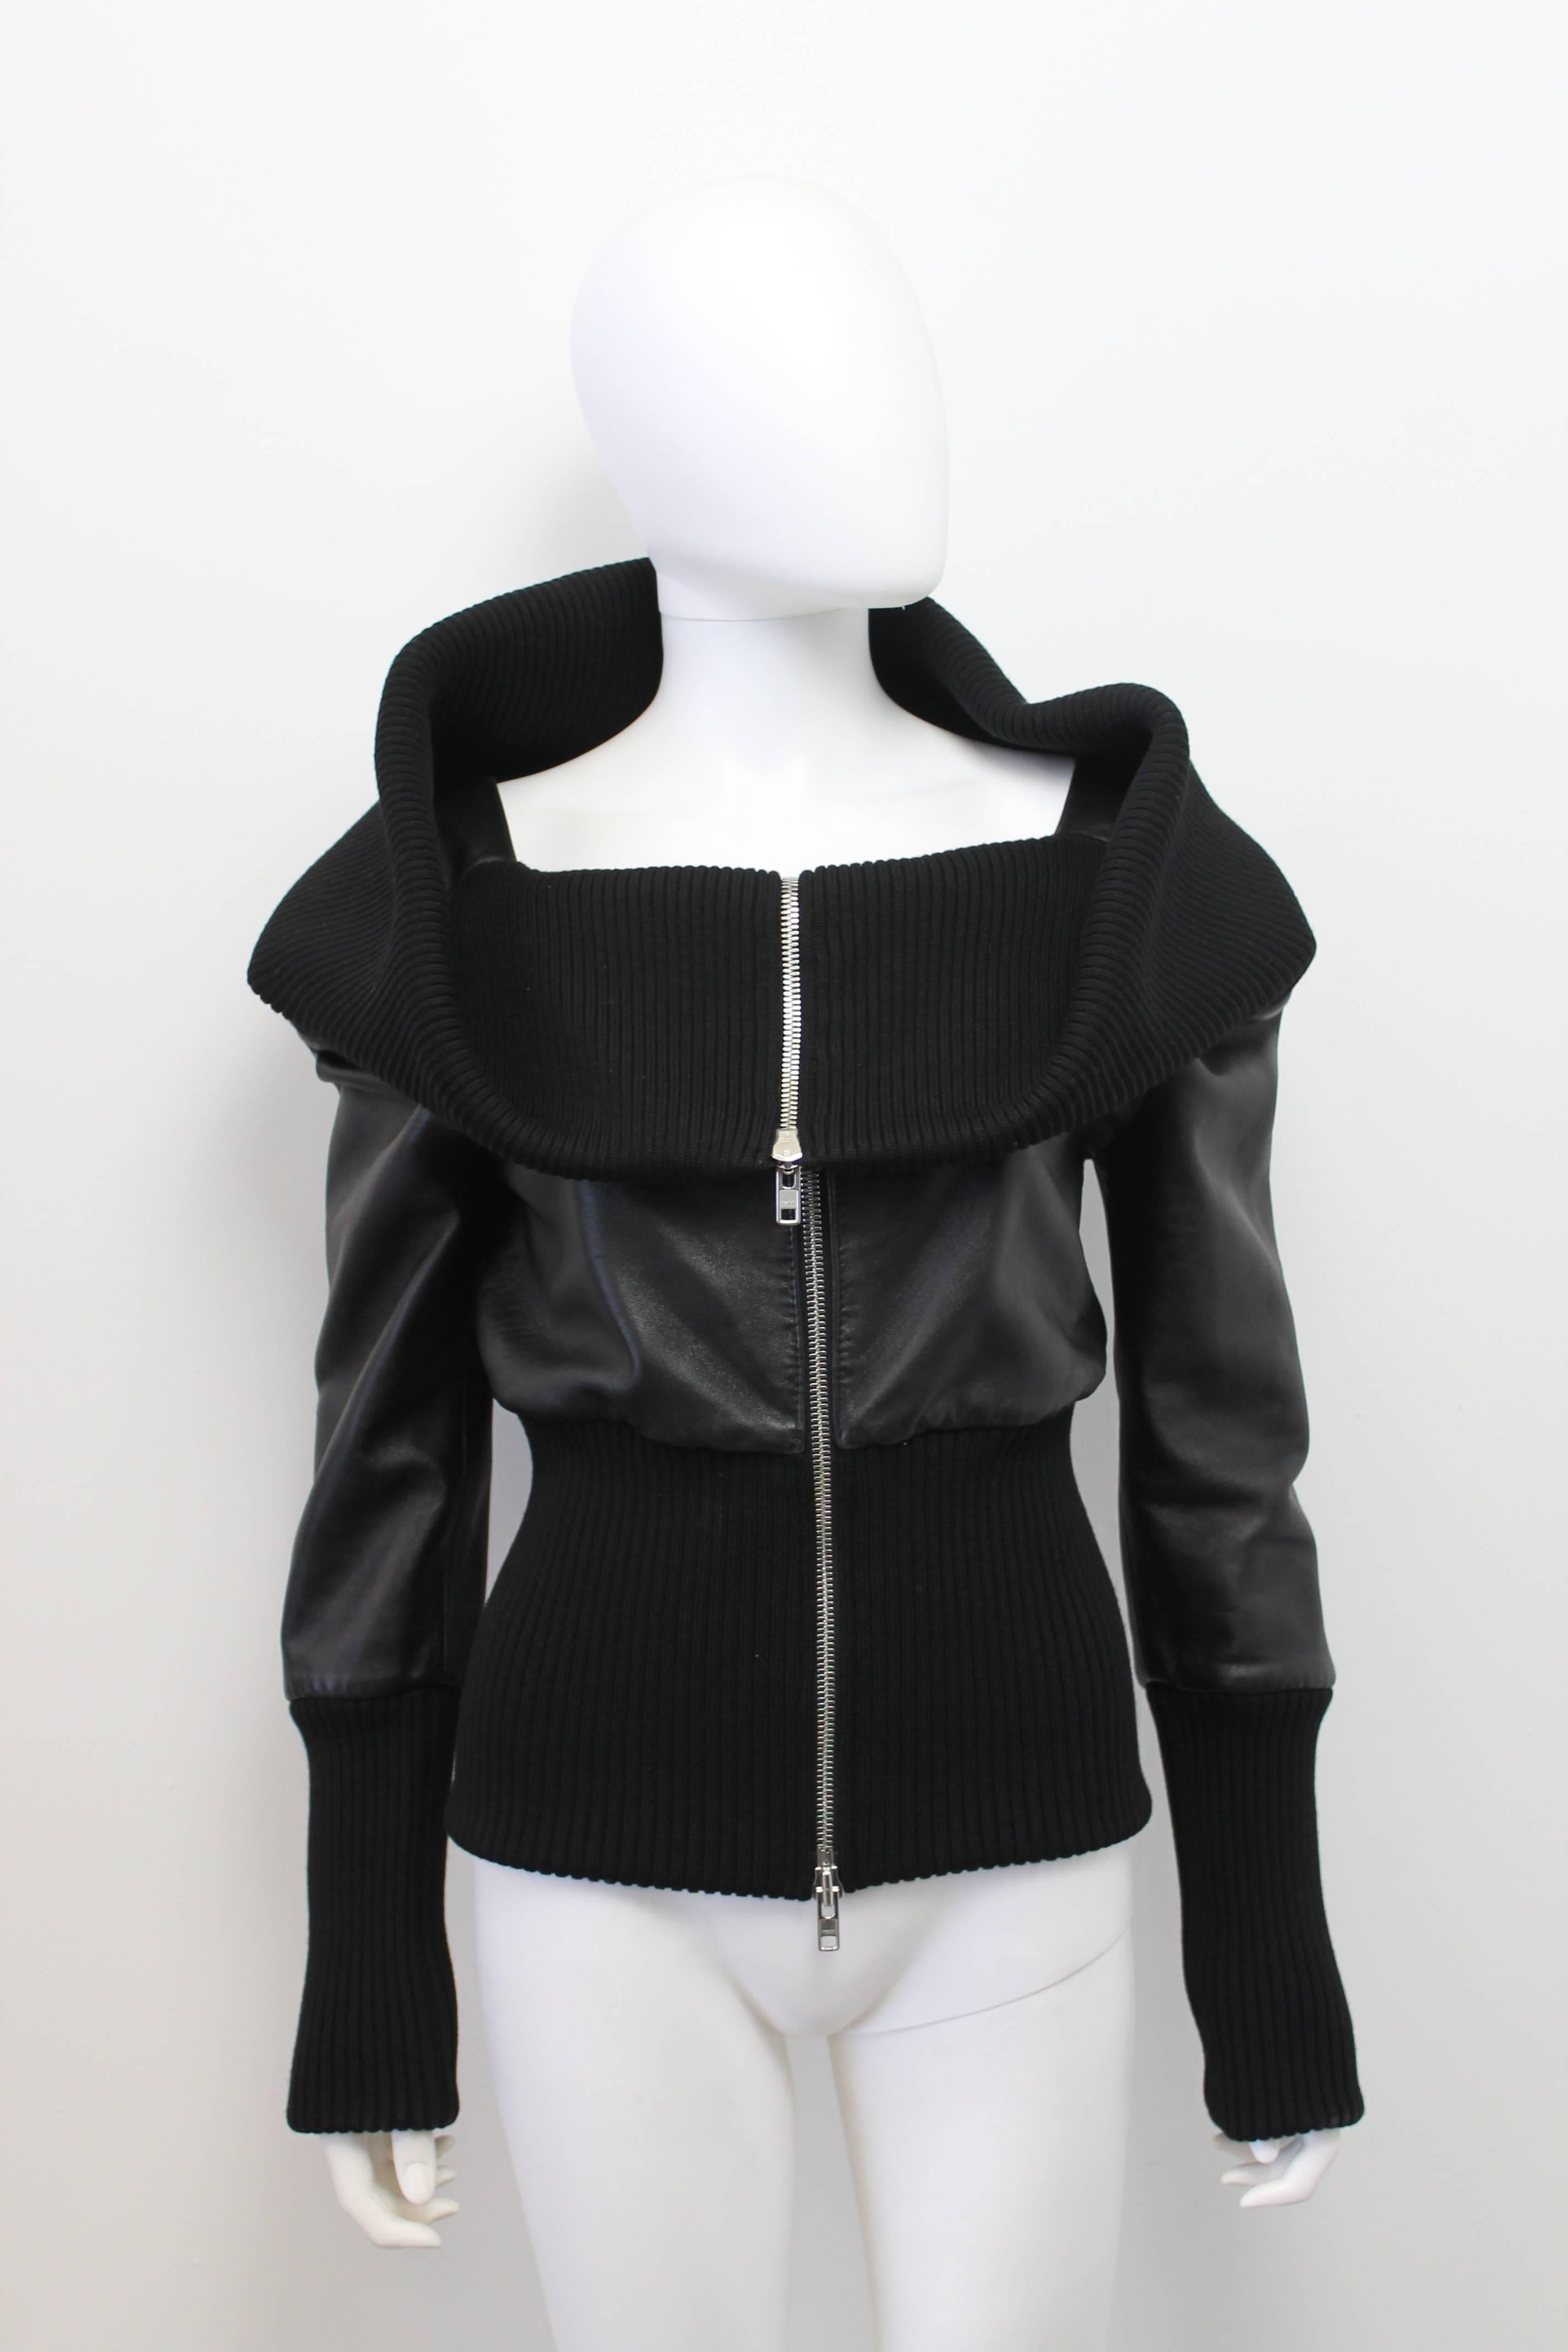 A very rare and memorable piece by Maison Martin Margiela from their Autumn-Winter 2008 collection. The jacket features a giant rib-knit collar that can be folded and worn in many different ways.